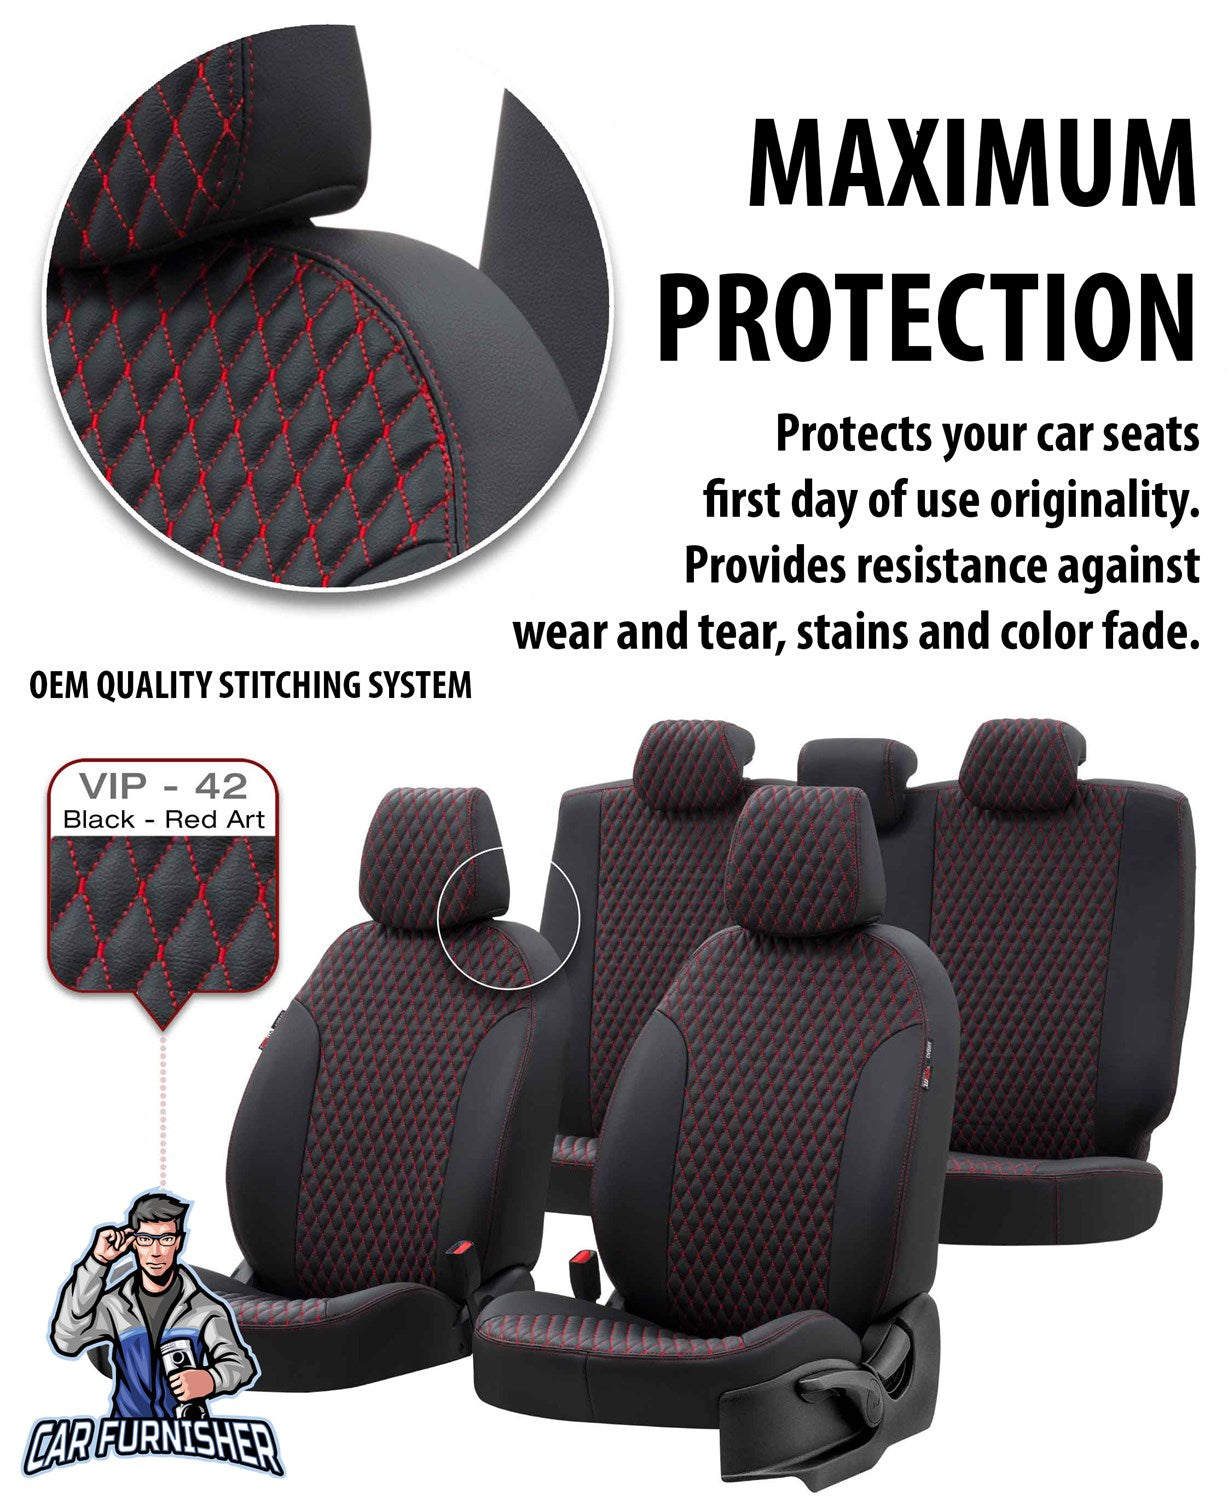 Citroen Jumpy Seat Covers Amsterdam Leather Design Black Leather